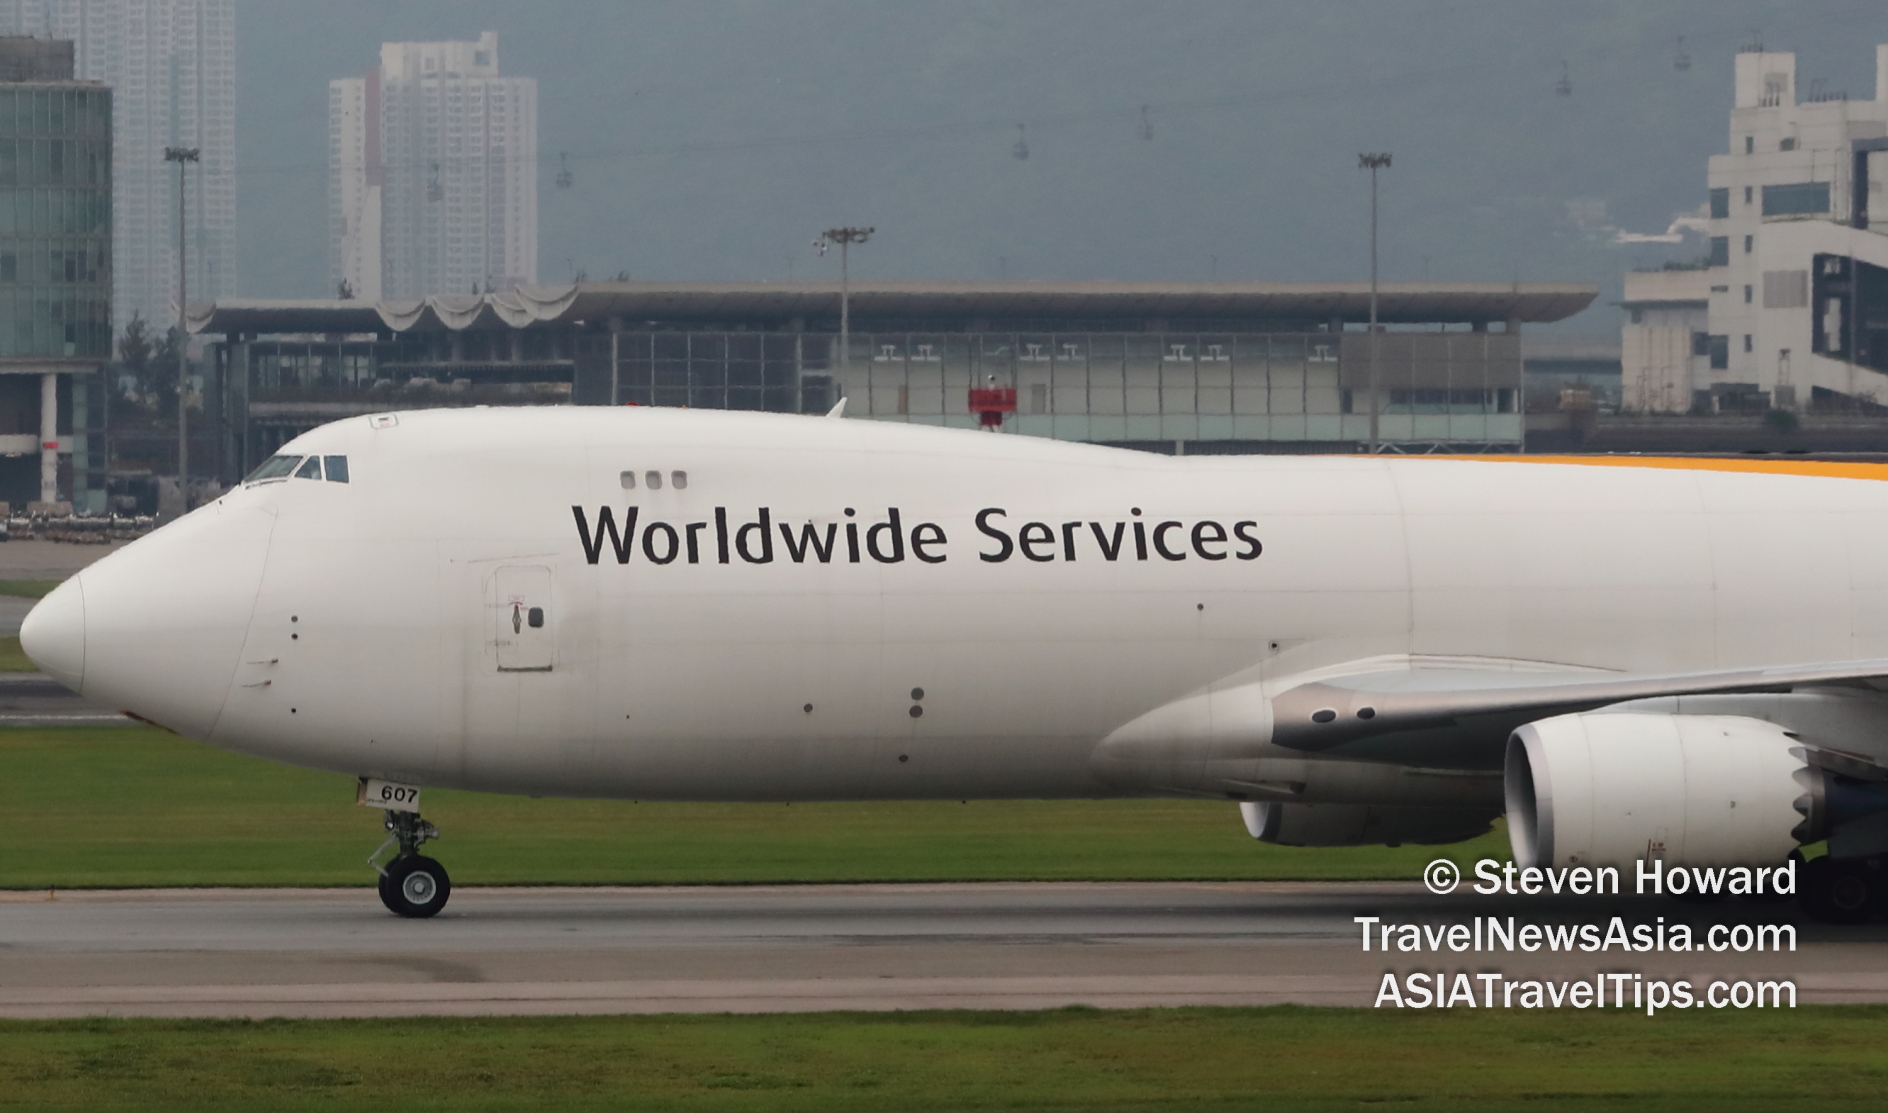 UPS Boeing 747-8F N607UP at HKIA. Picture by Steven Howard of TravelNewsAsia.com Click to enlarge.